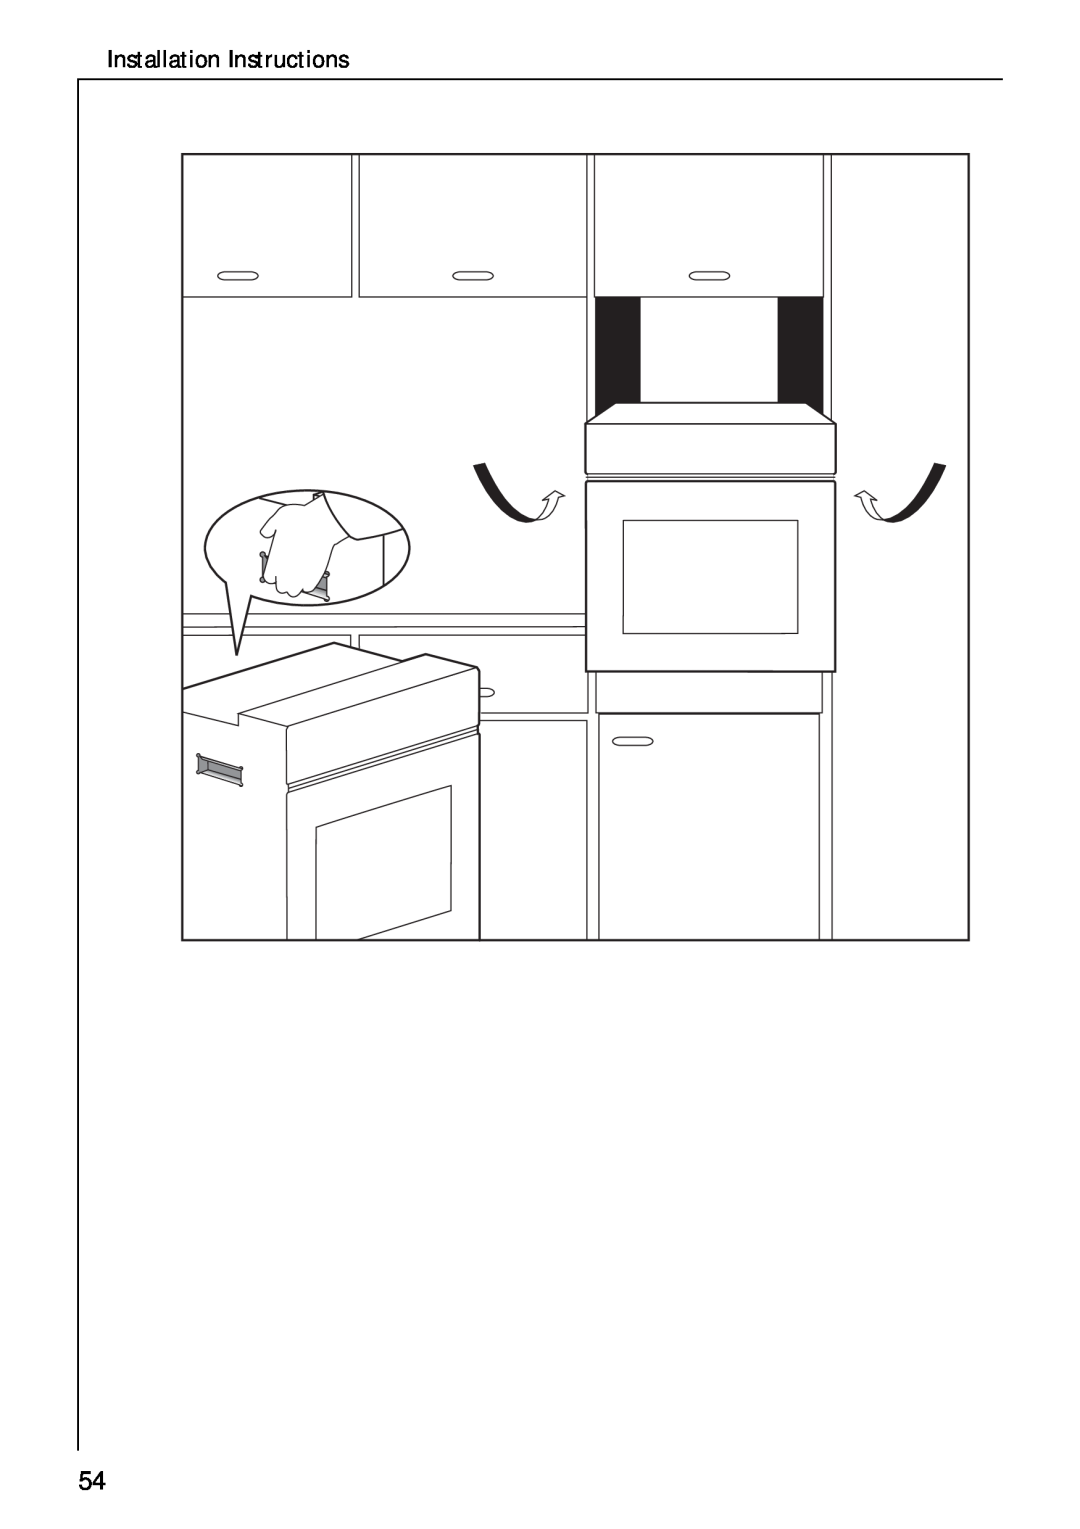 Electrolux B 4100 manual Installation Instructions 